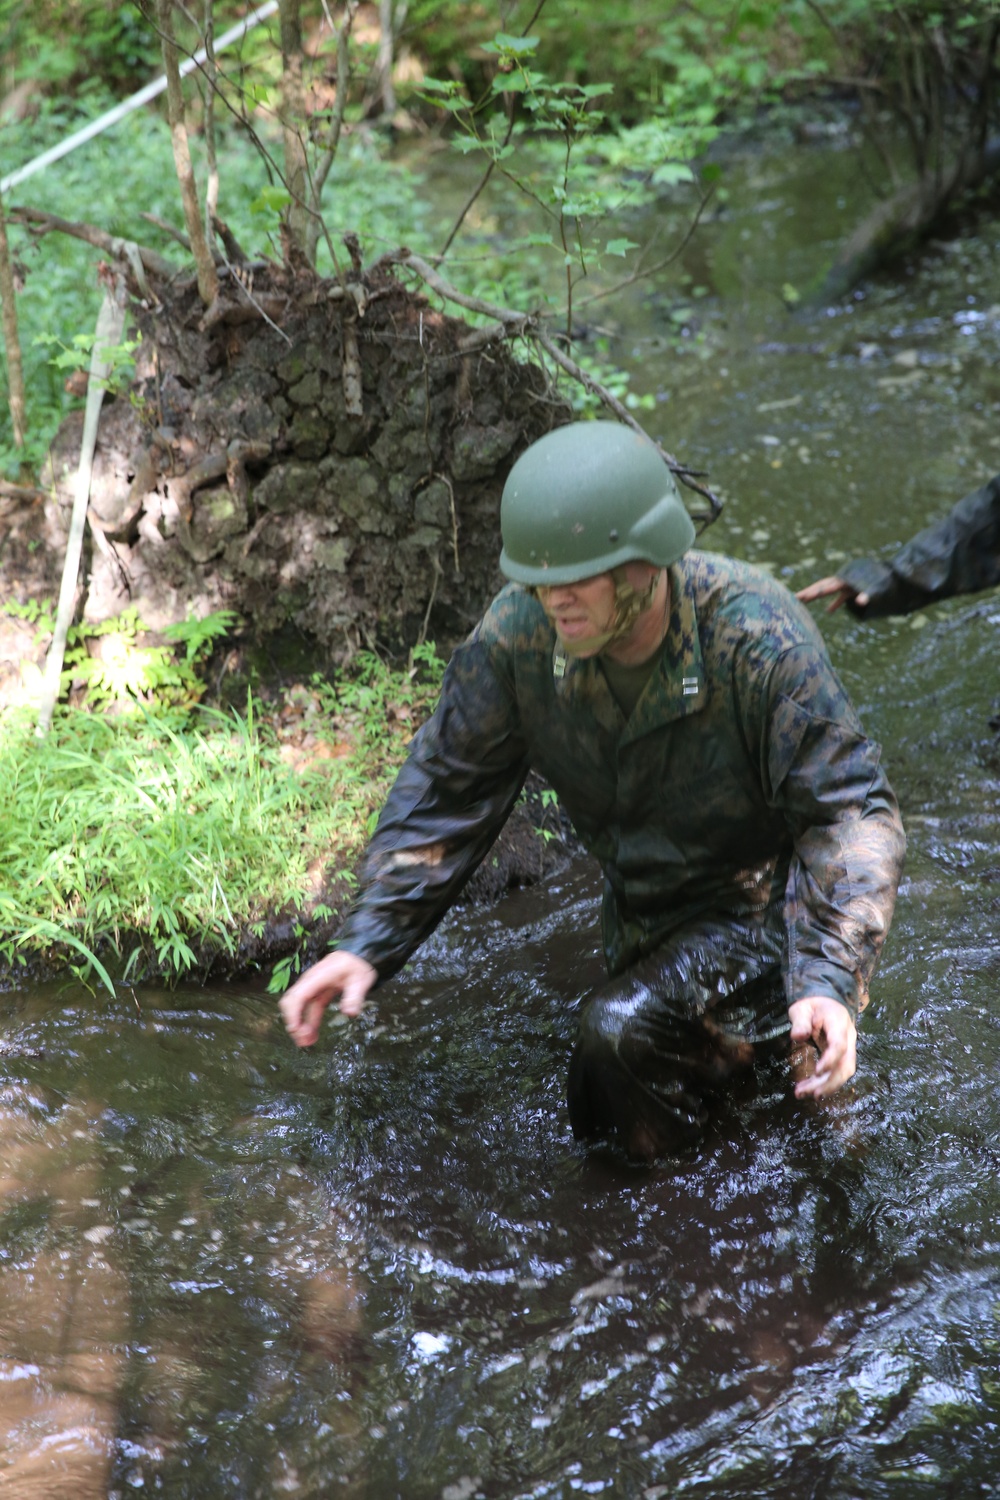 Cookin’ up mud: Food Service Company runs the endurance course